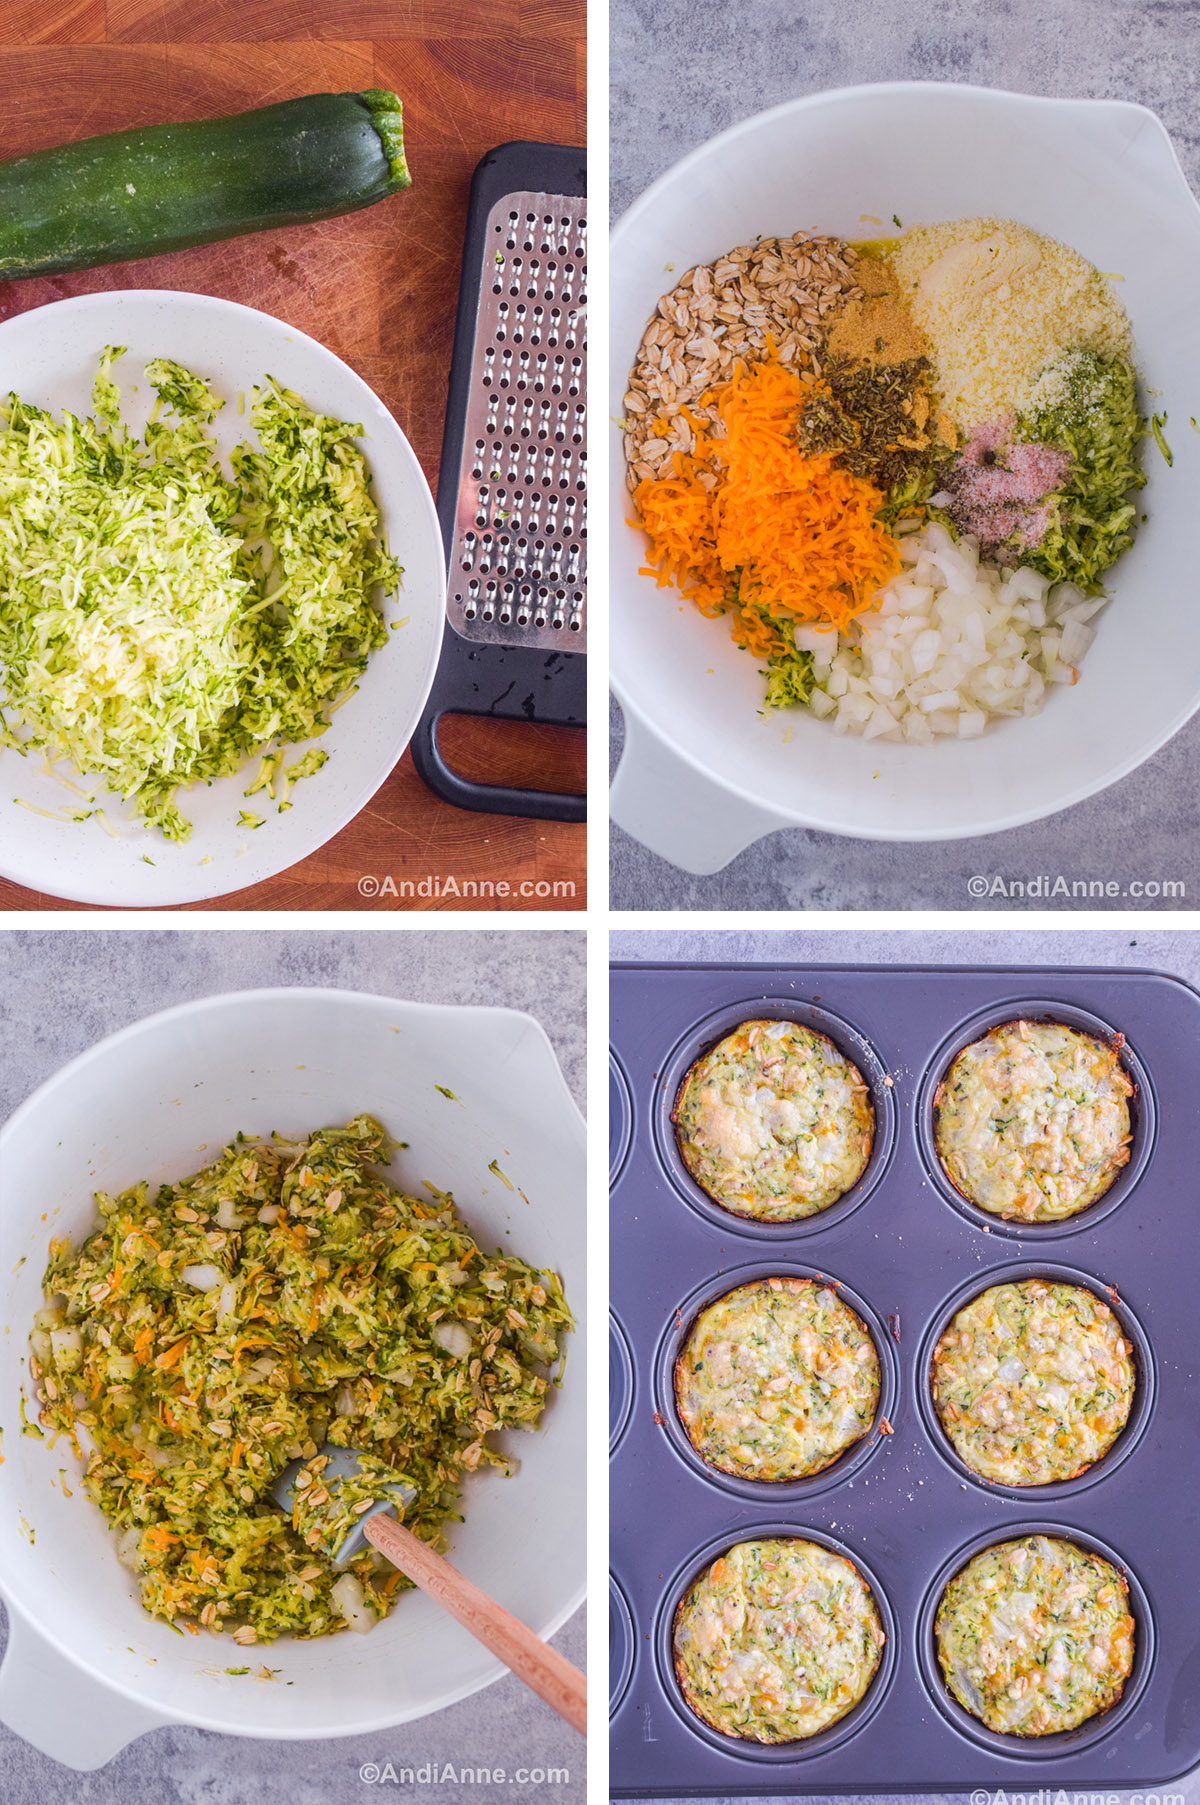 Four images showing steps to make the recipe. First is a white bowl with shredded zucchini and a cheese grater. Second is a bowl with chopped onion, parmesan, cheese, zucchini, oats and spices dumped in. Third image is the zucchini bite batter in a large bowl with a spatula. Fourth image is a muffin pan with zucchini bites baked inside.